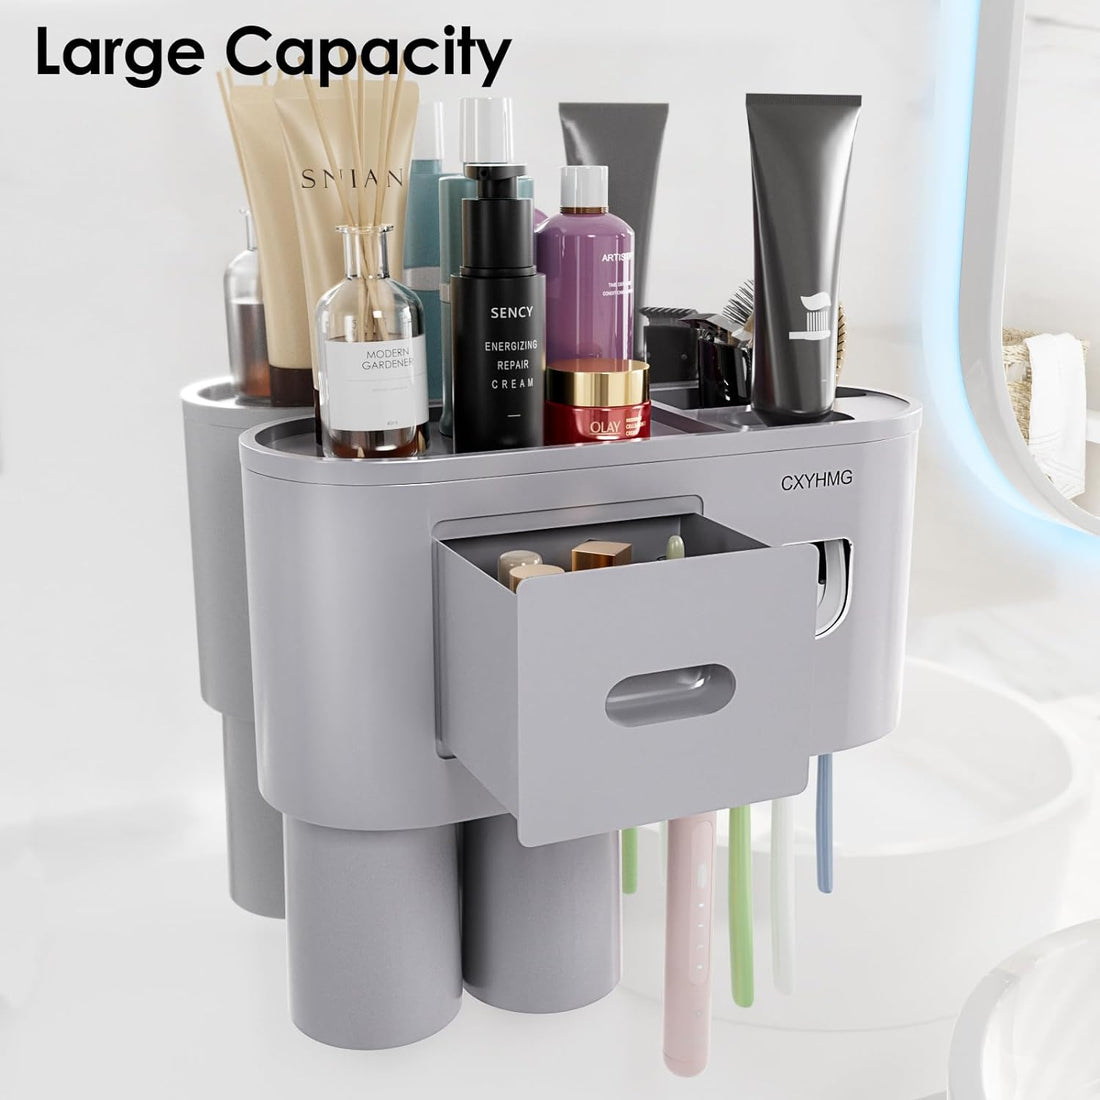 Toothbrush Holders for Bathroom, with Automatic Toothpaste Squeezer Dispenser, is Wall Mounted Bathroom Accessories Organizer, for Kids & Family Shower Decor. (Grey 2 Cup)